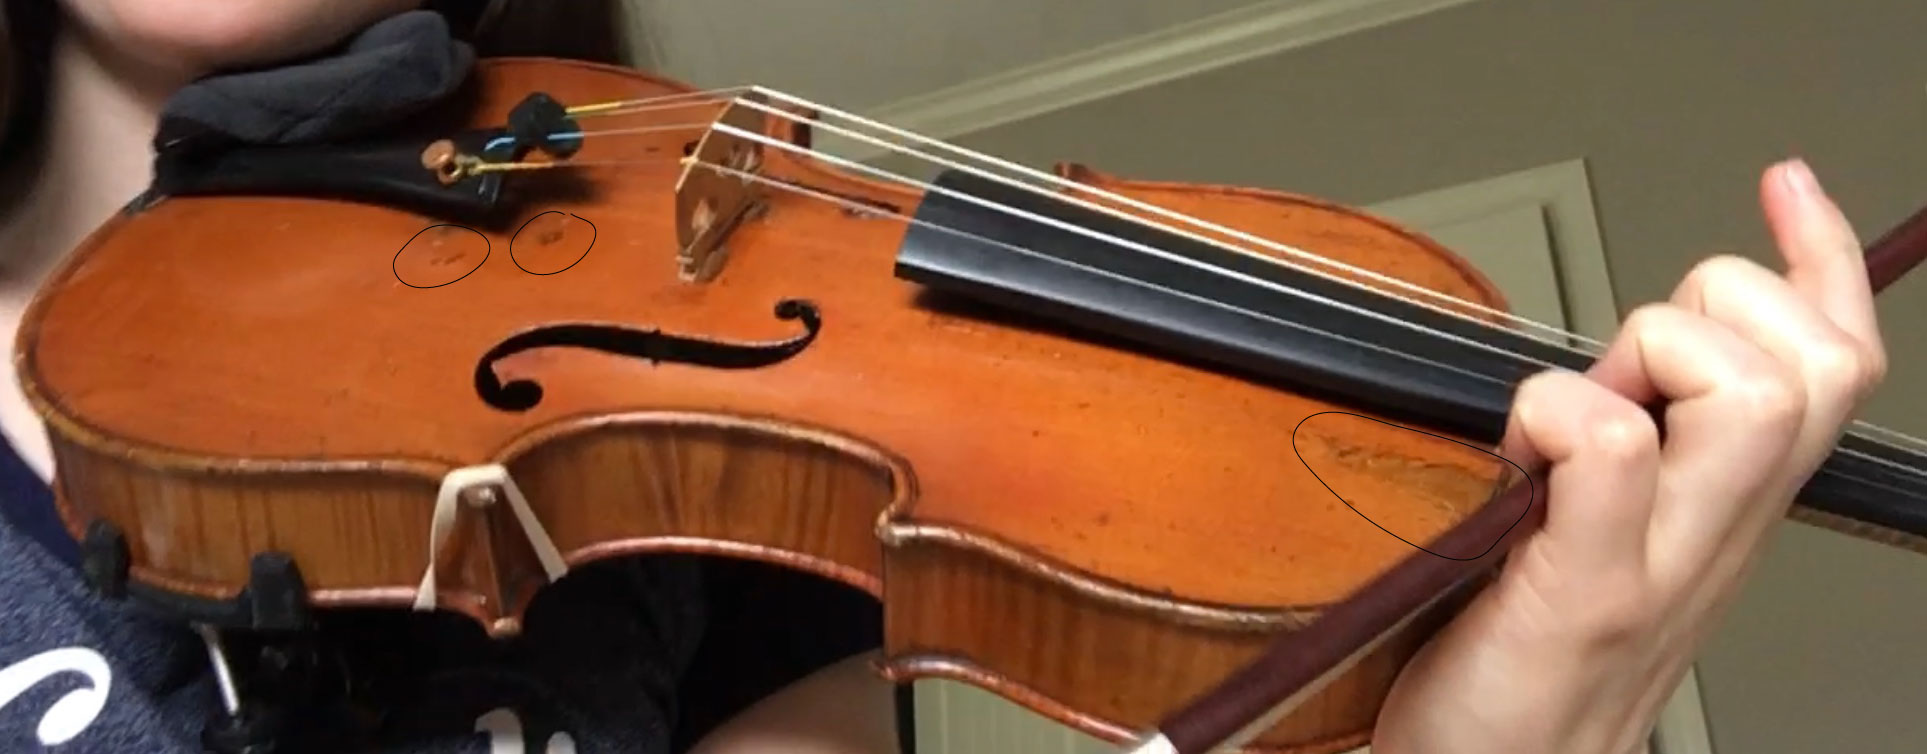 Violin Stolen from Rome Tour Bus